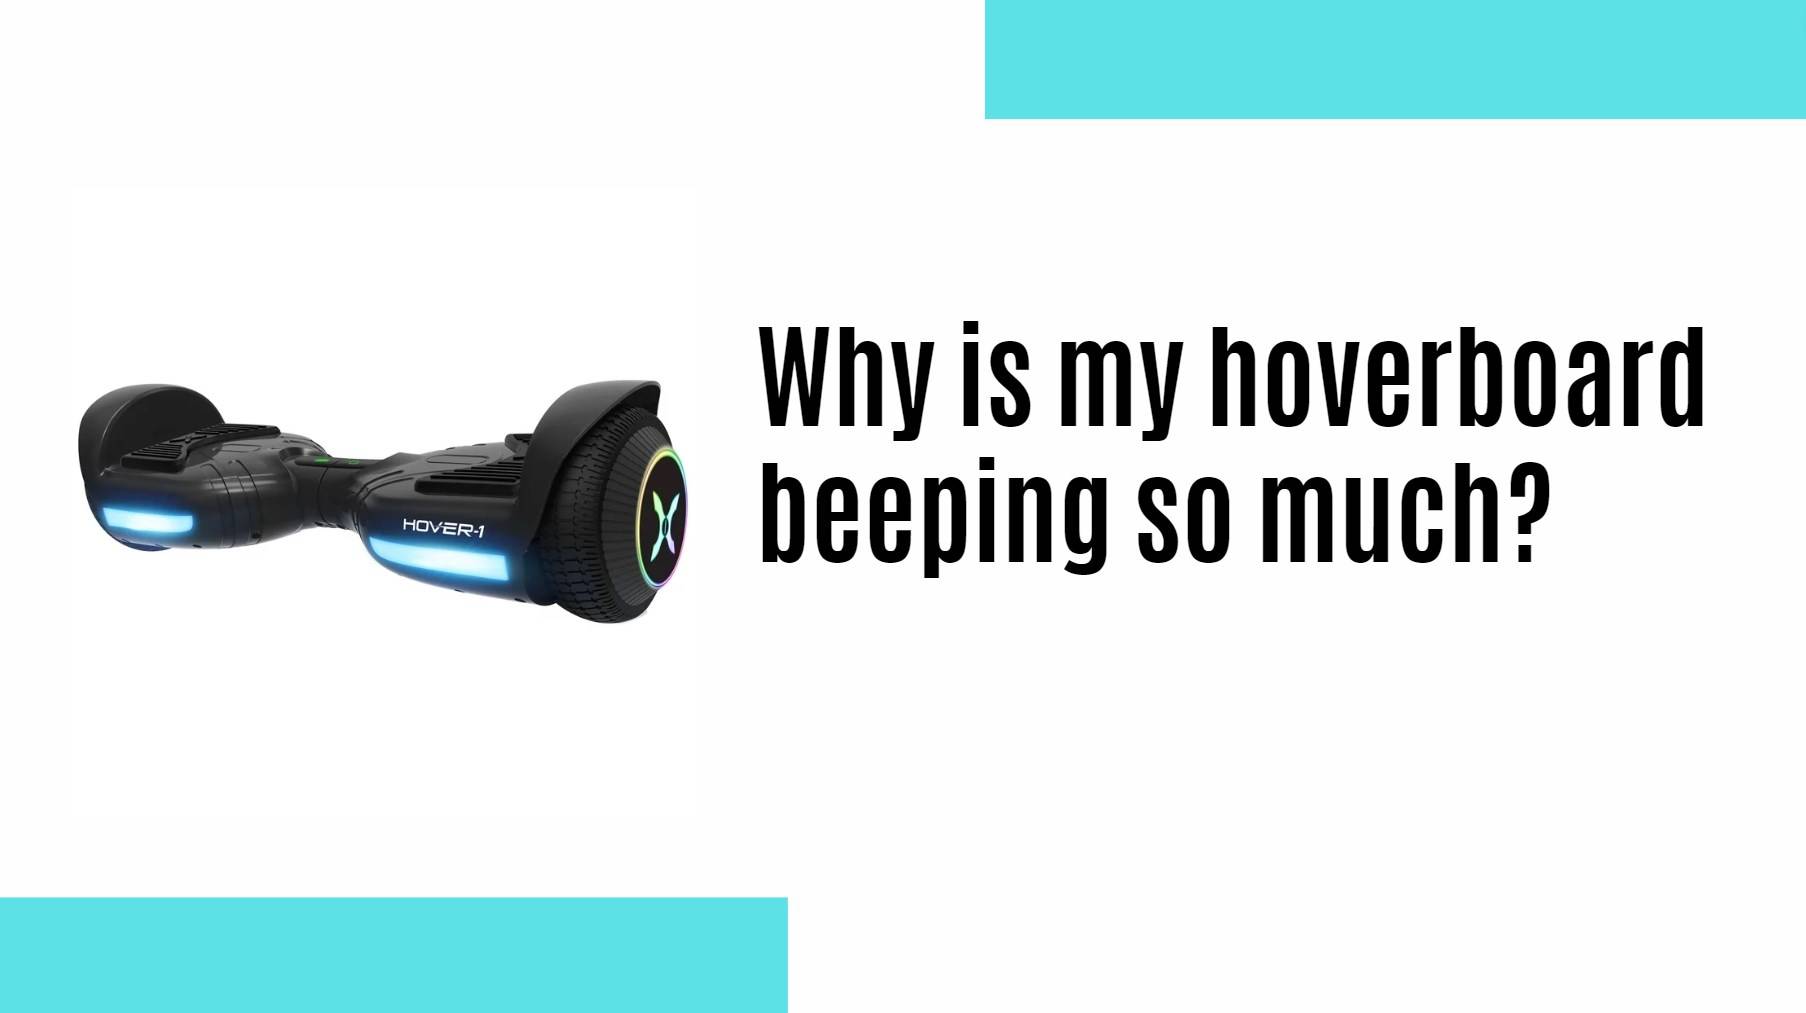 hoverboard lithium battery factory manufacturer. Why is my hoverboard beeping so much?